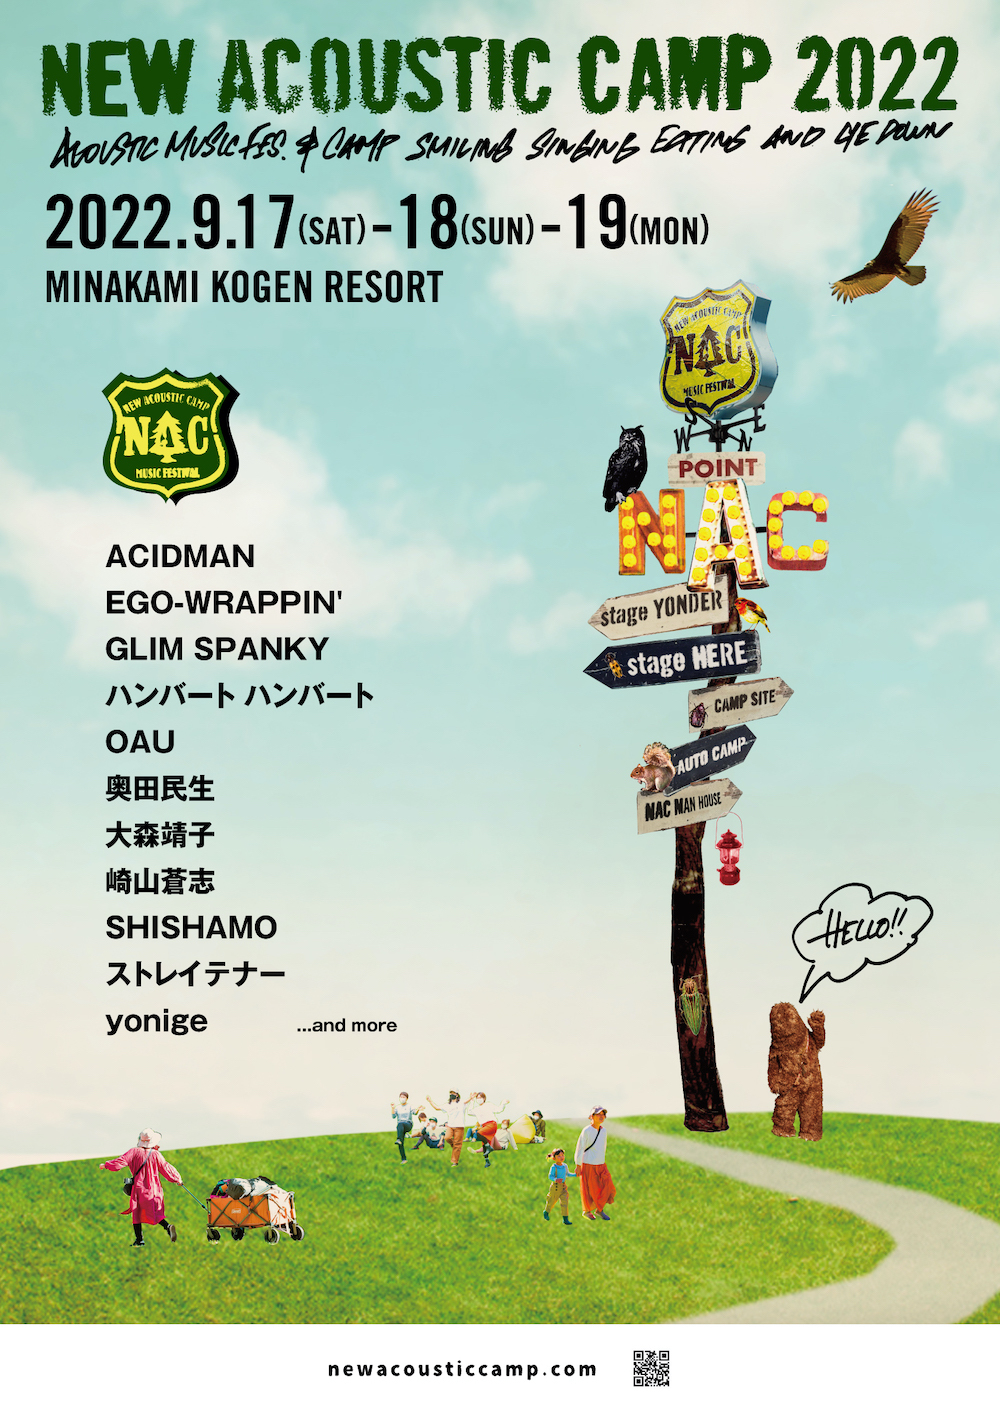 『New Acoustic Camp 2022』